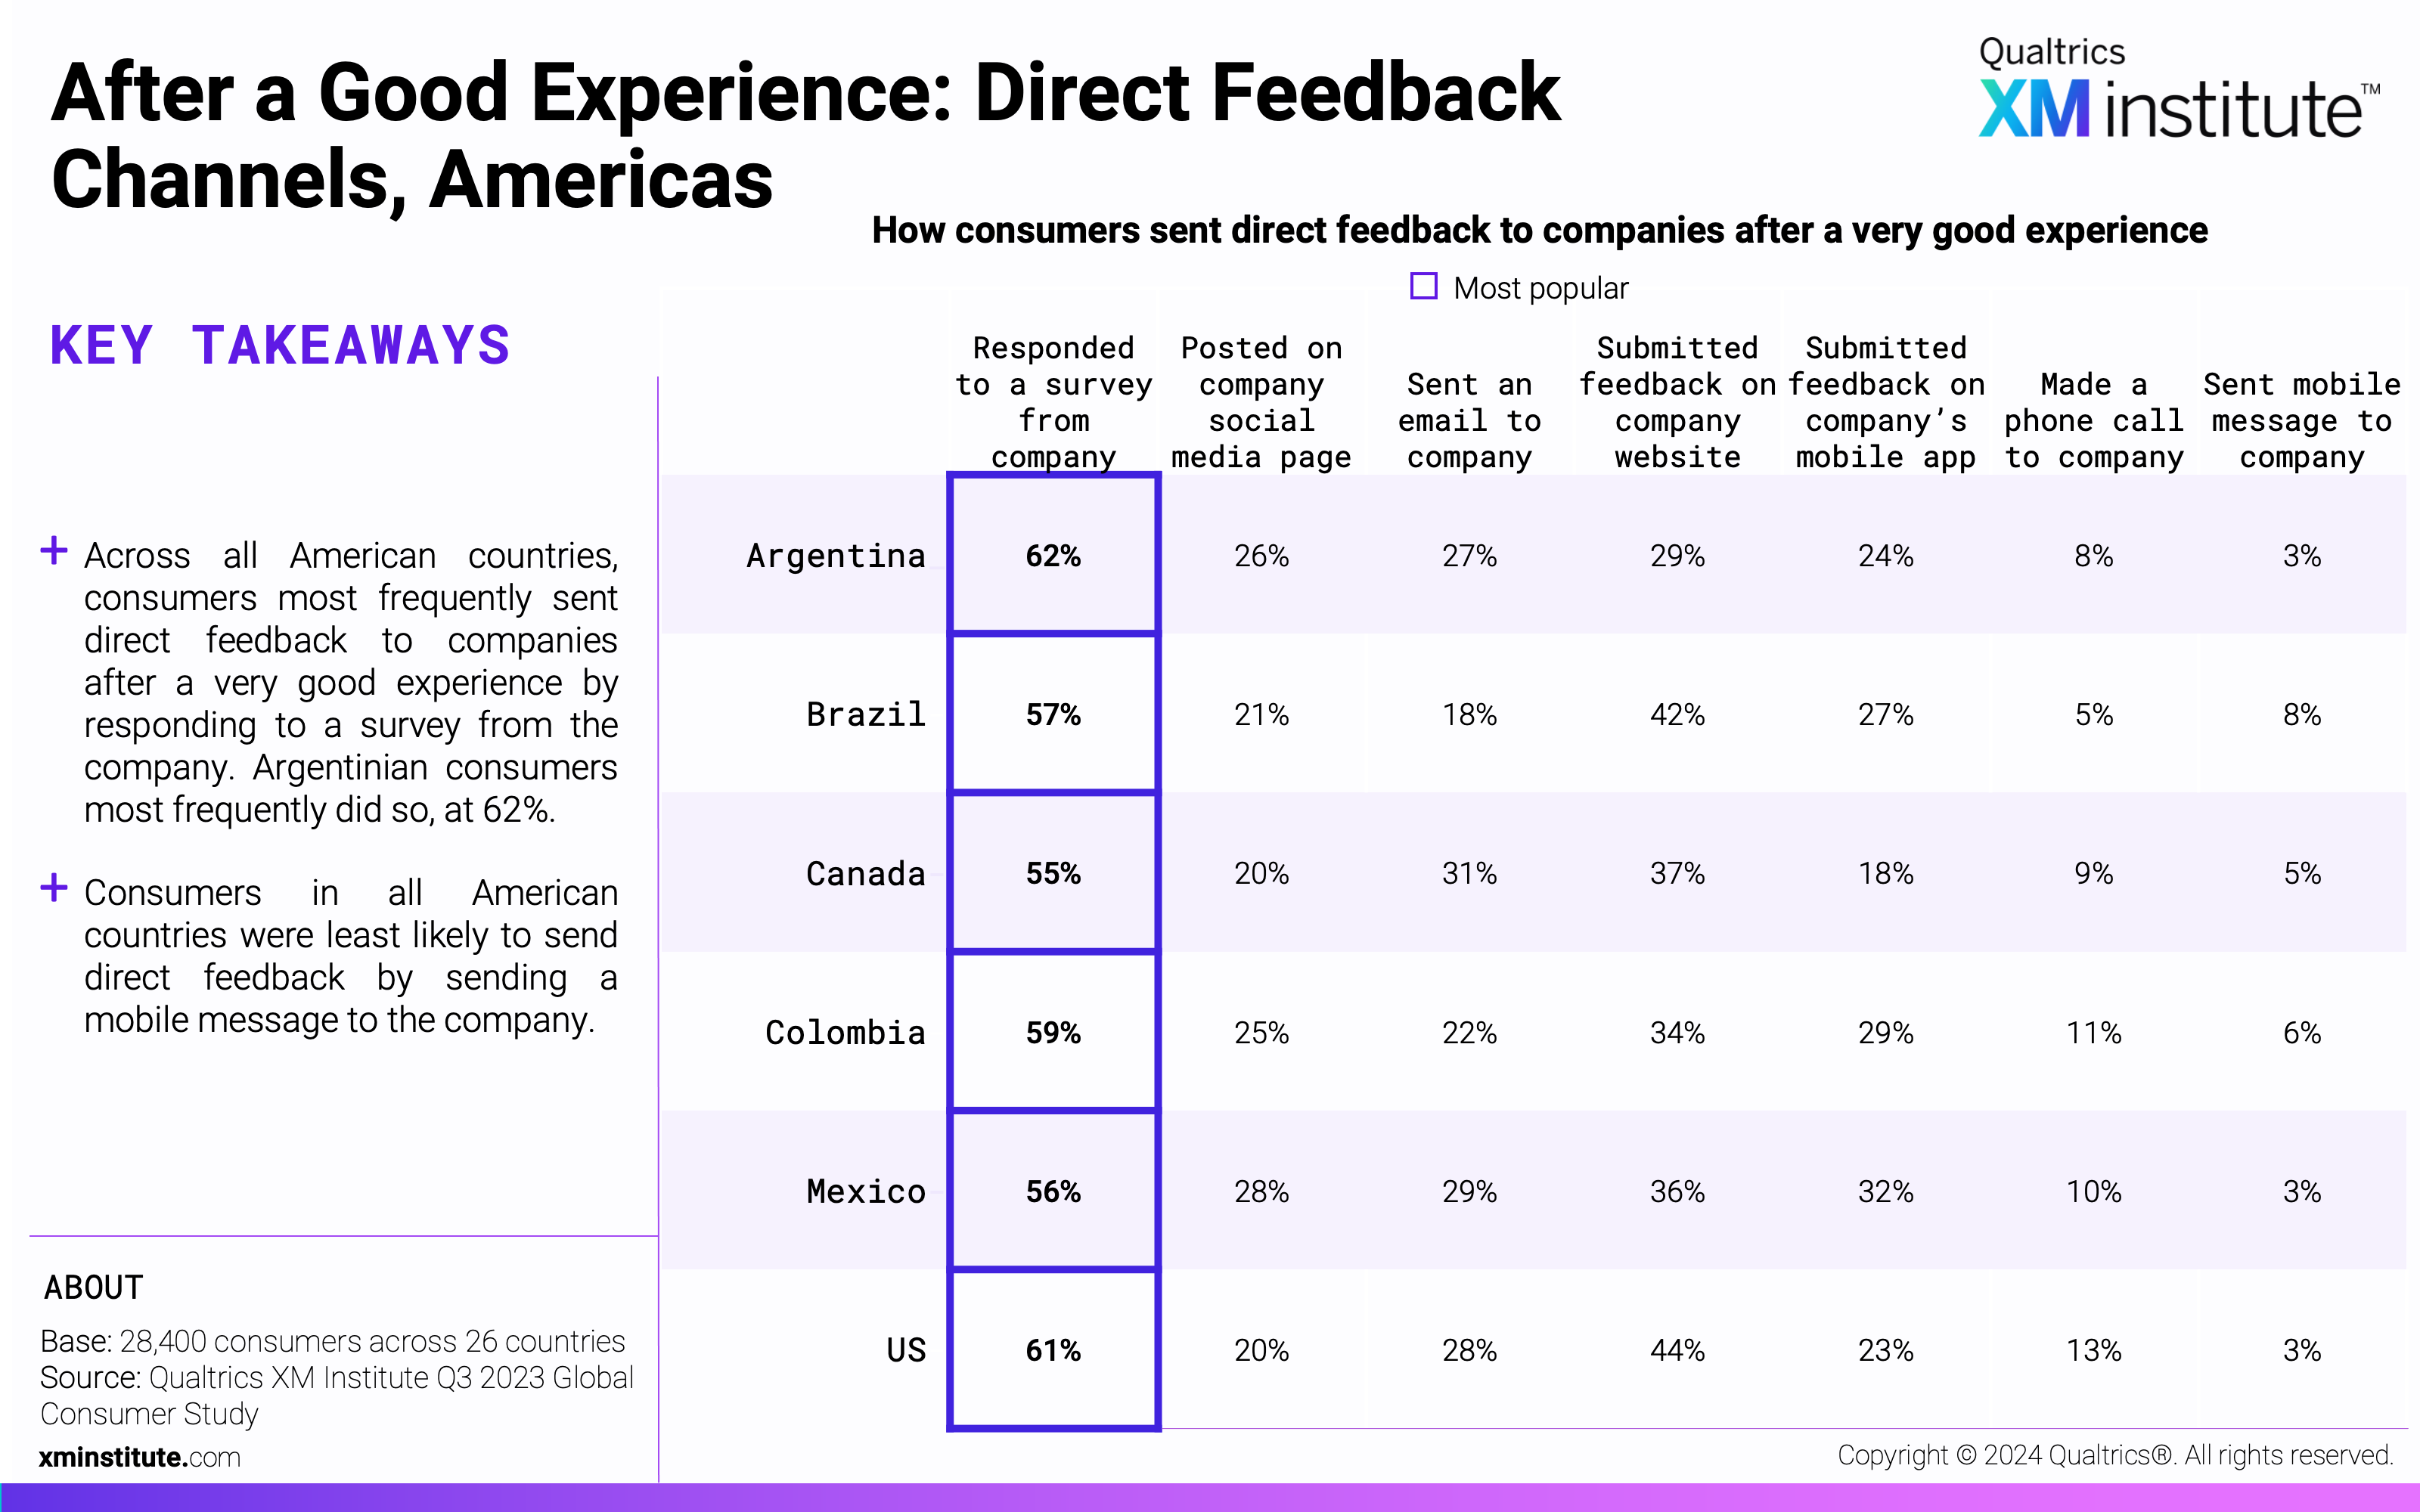 This chart shows which channels consumers from each country used to send feedback directly to companies after a very good experience.